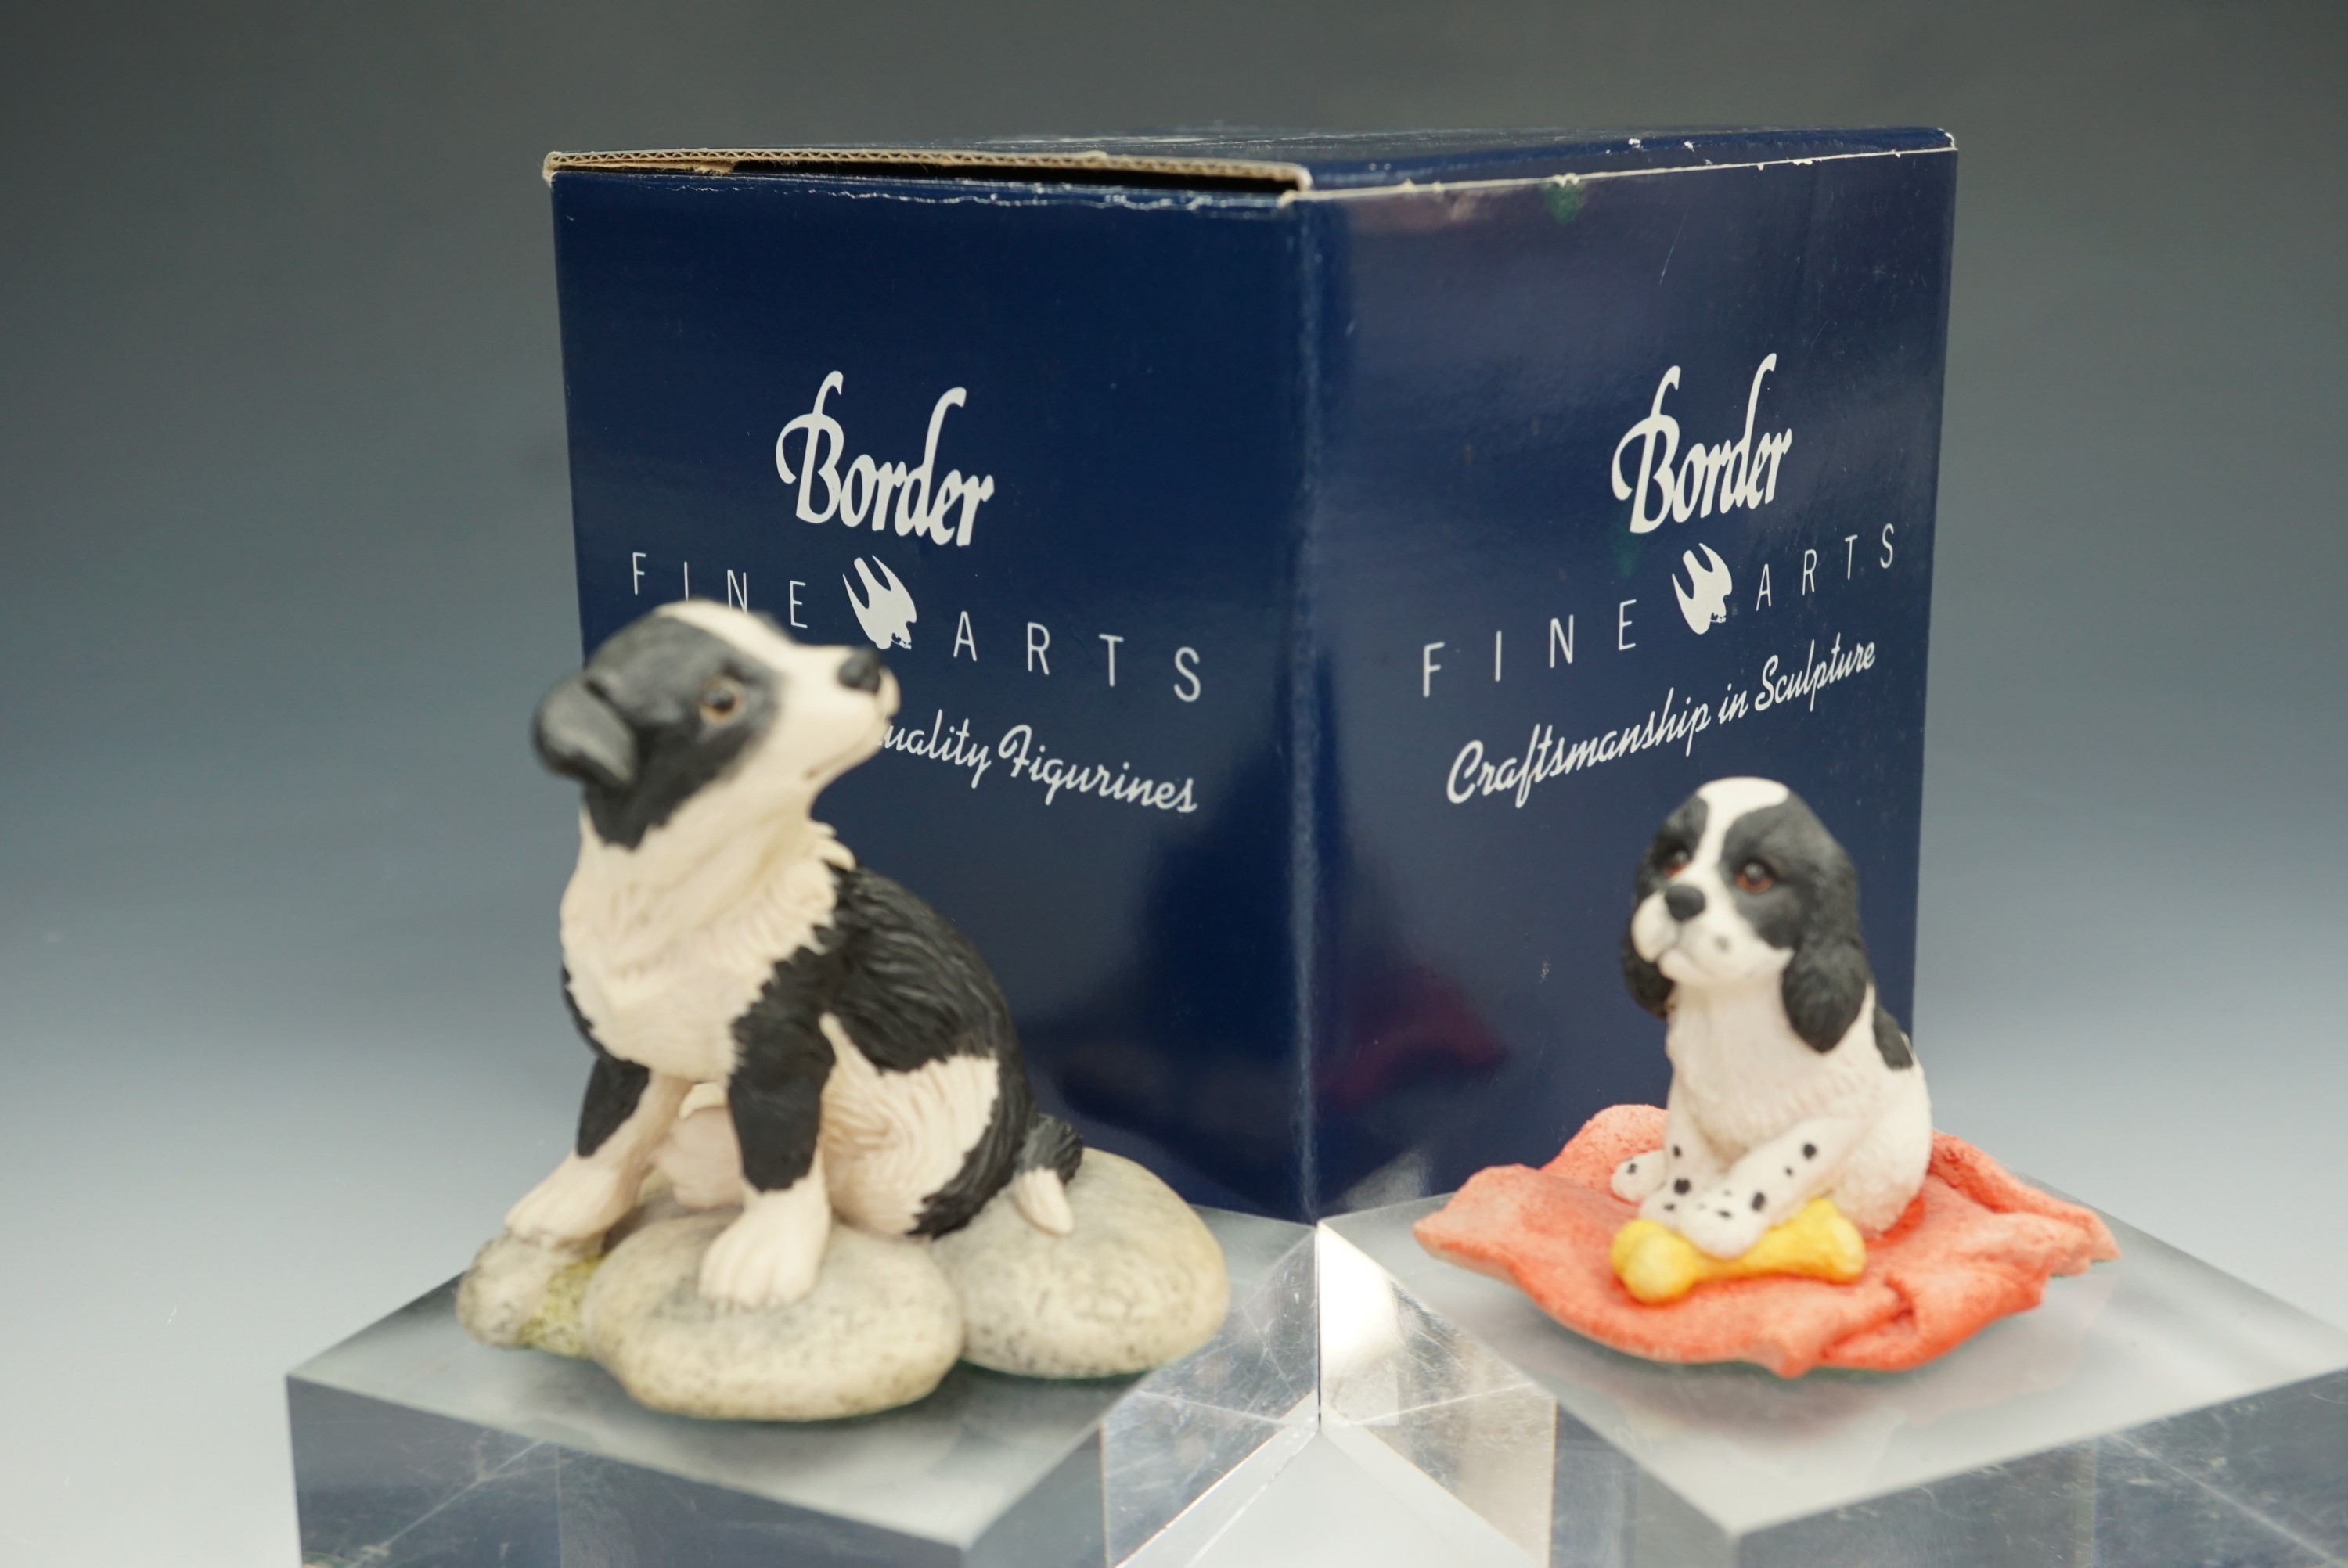 Two miniature Border Fine Arts figurines 'All Creatures Great and Small' together with 'First